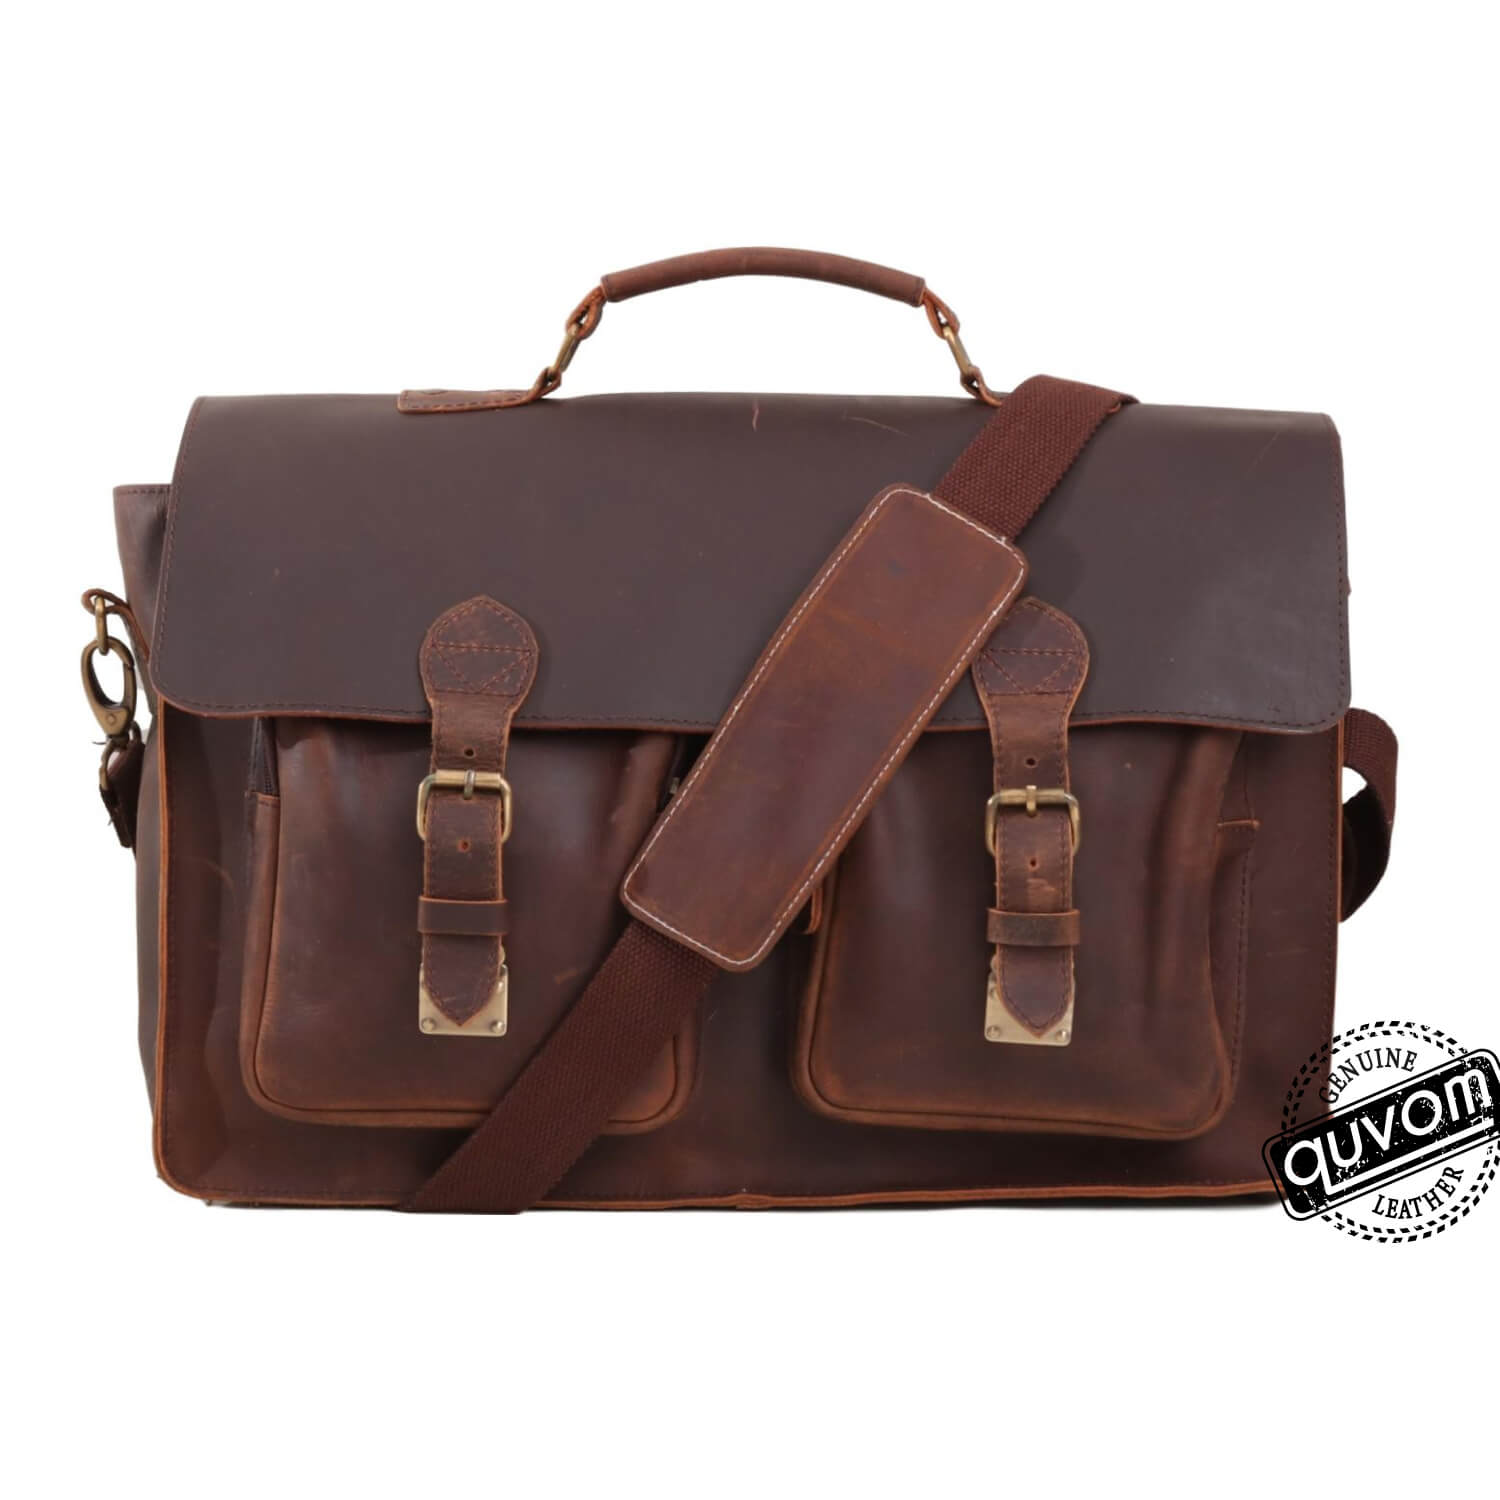 The Magnificent Rustic Leather Briefcase | Quvom.com